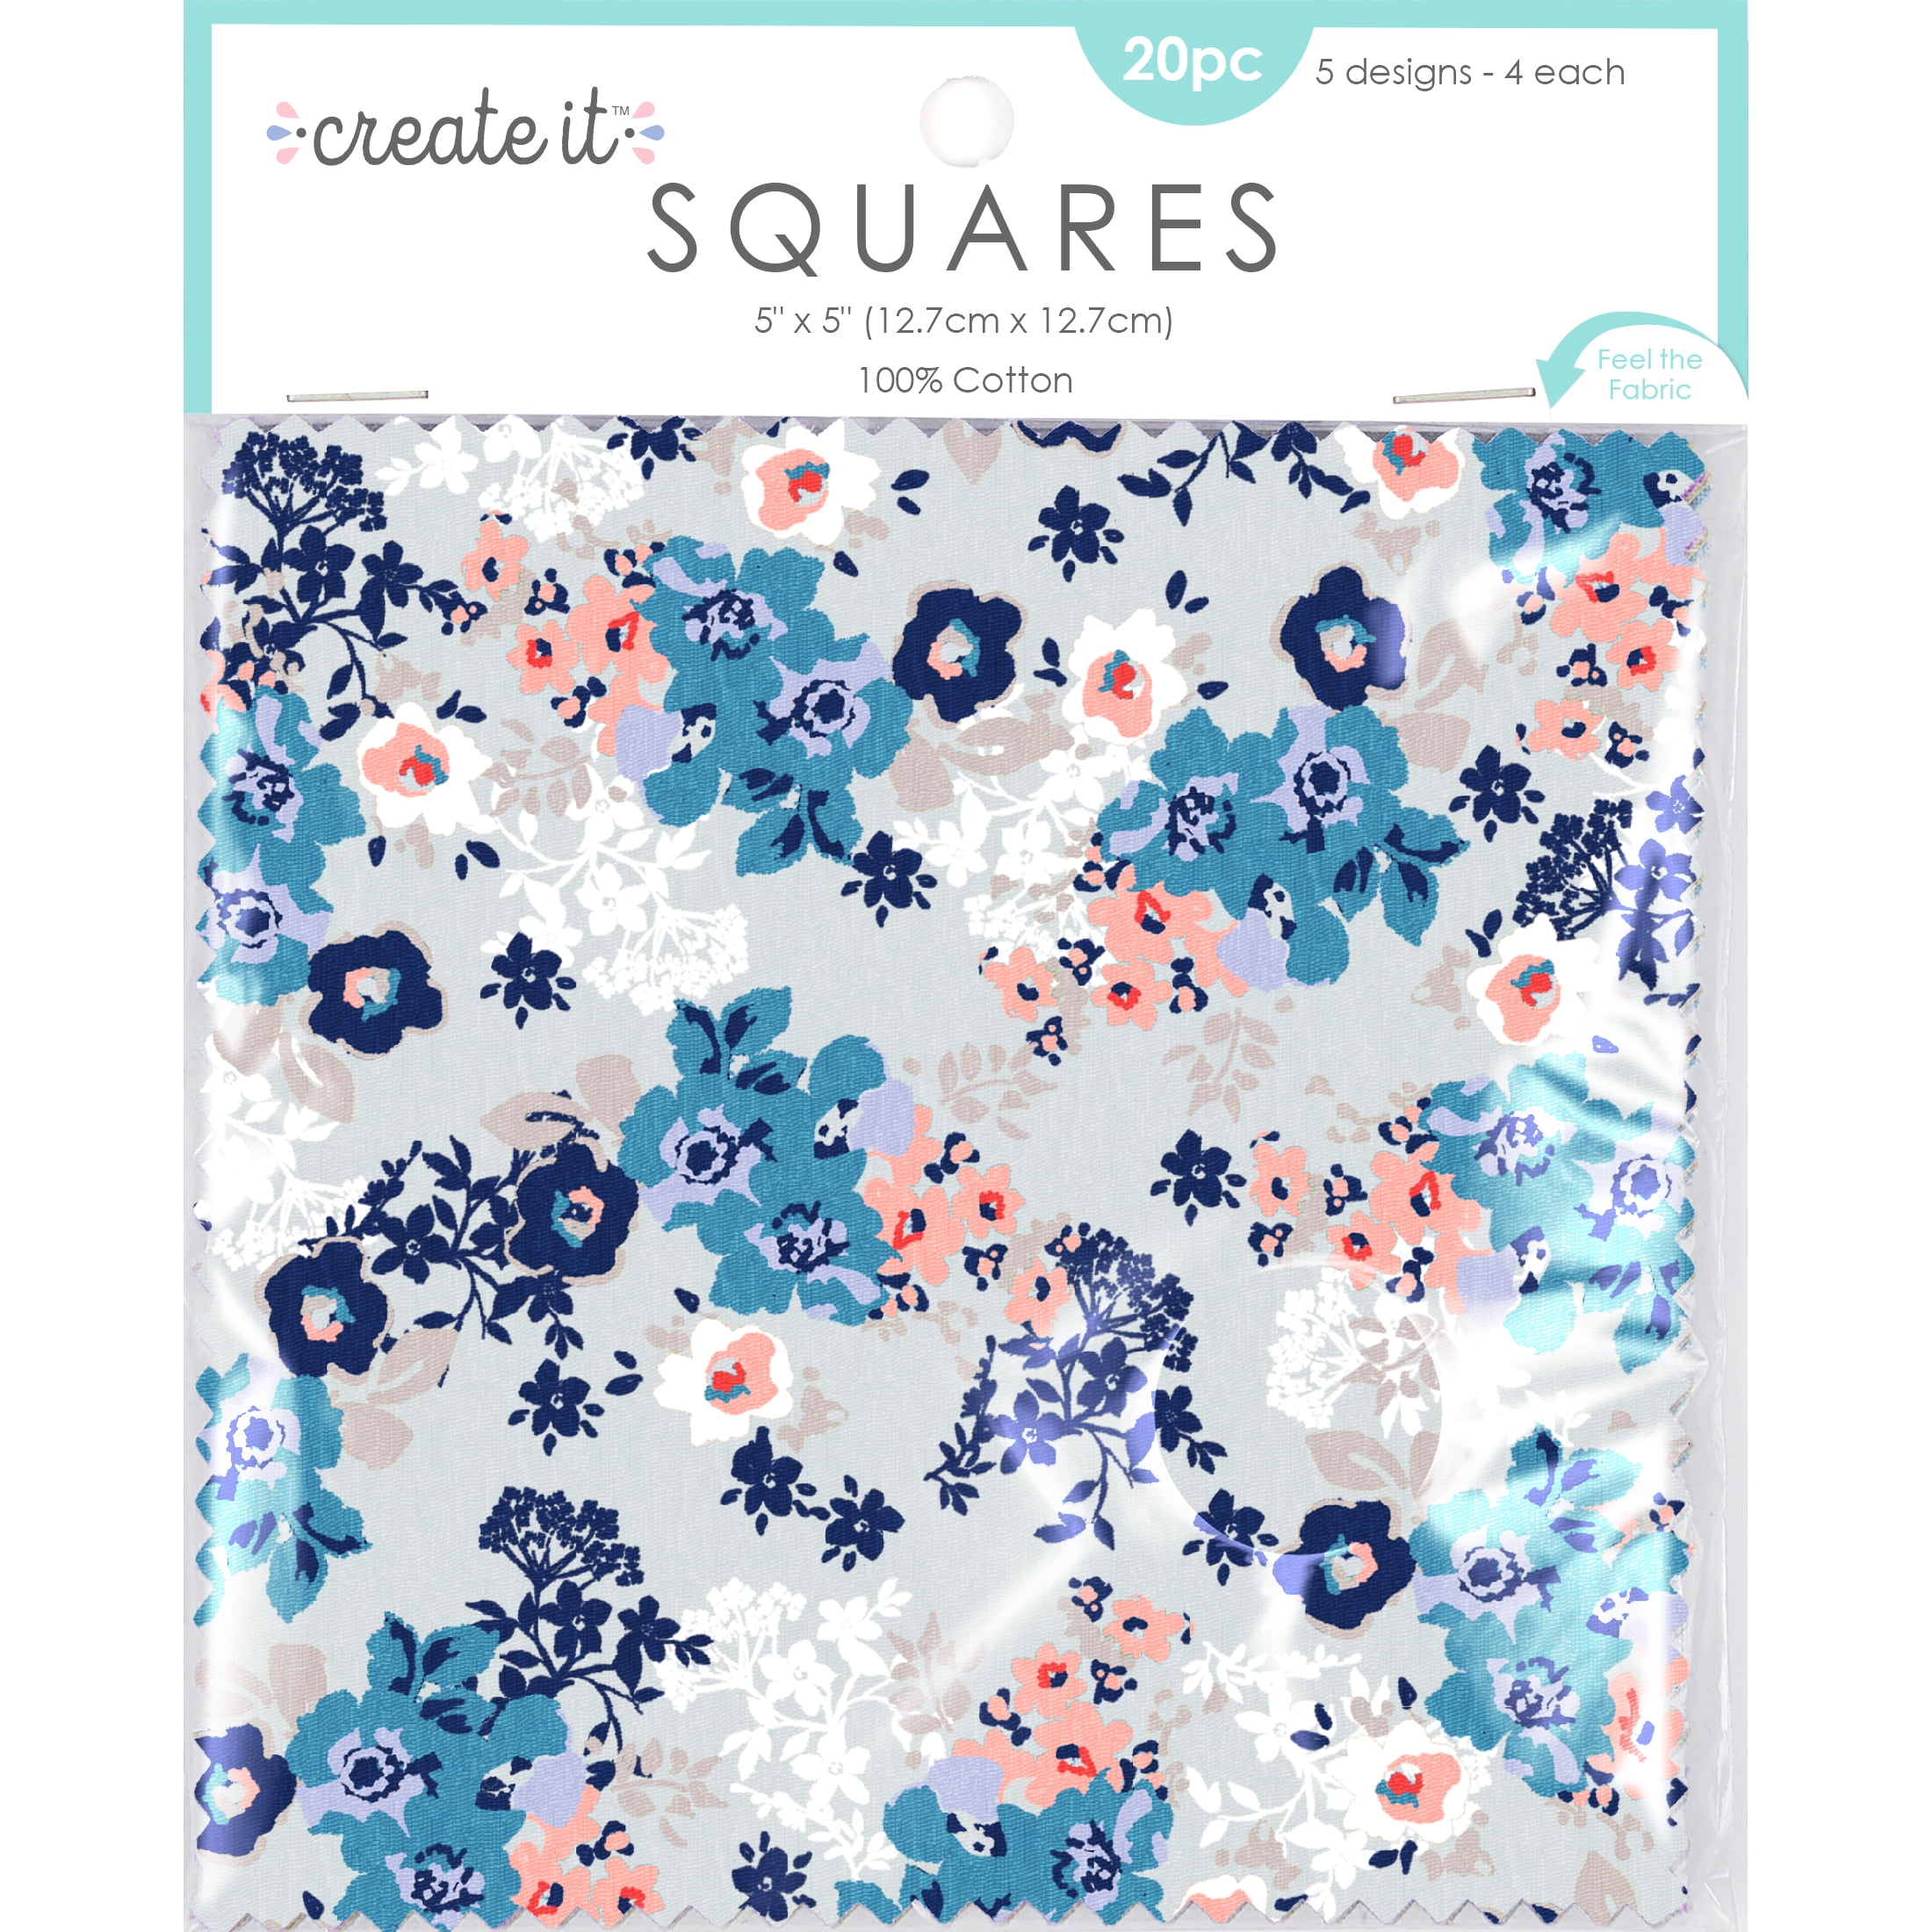  5 x 5 Inches(13cm x 13cm) Charm Packs Cotton Fabric Squares,Precut  Quilting Floral Fabric Bundles for Craft DIY